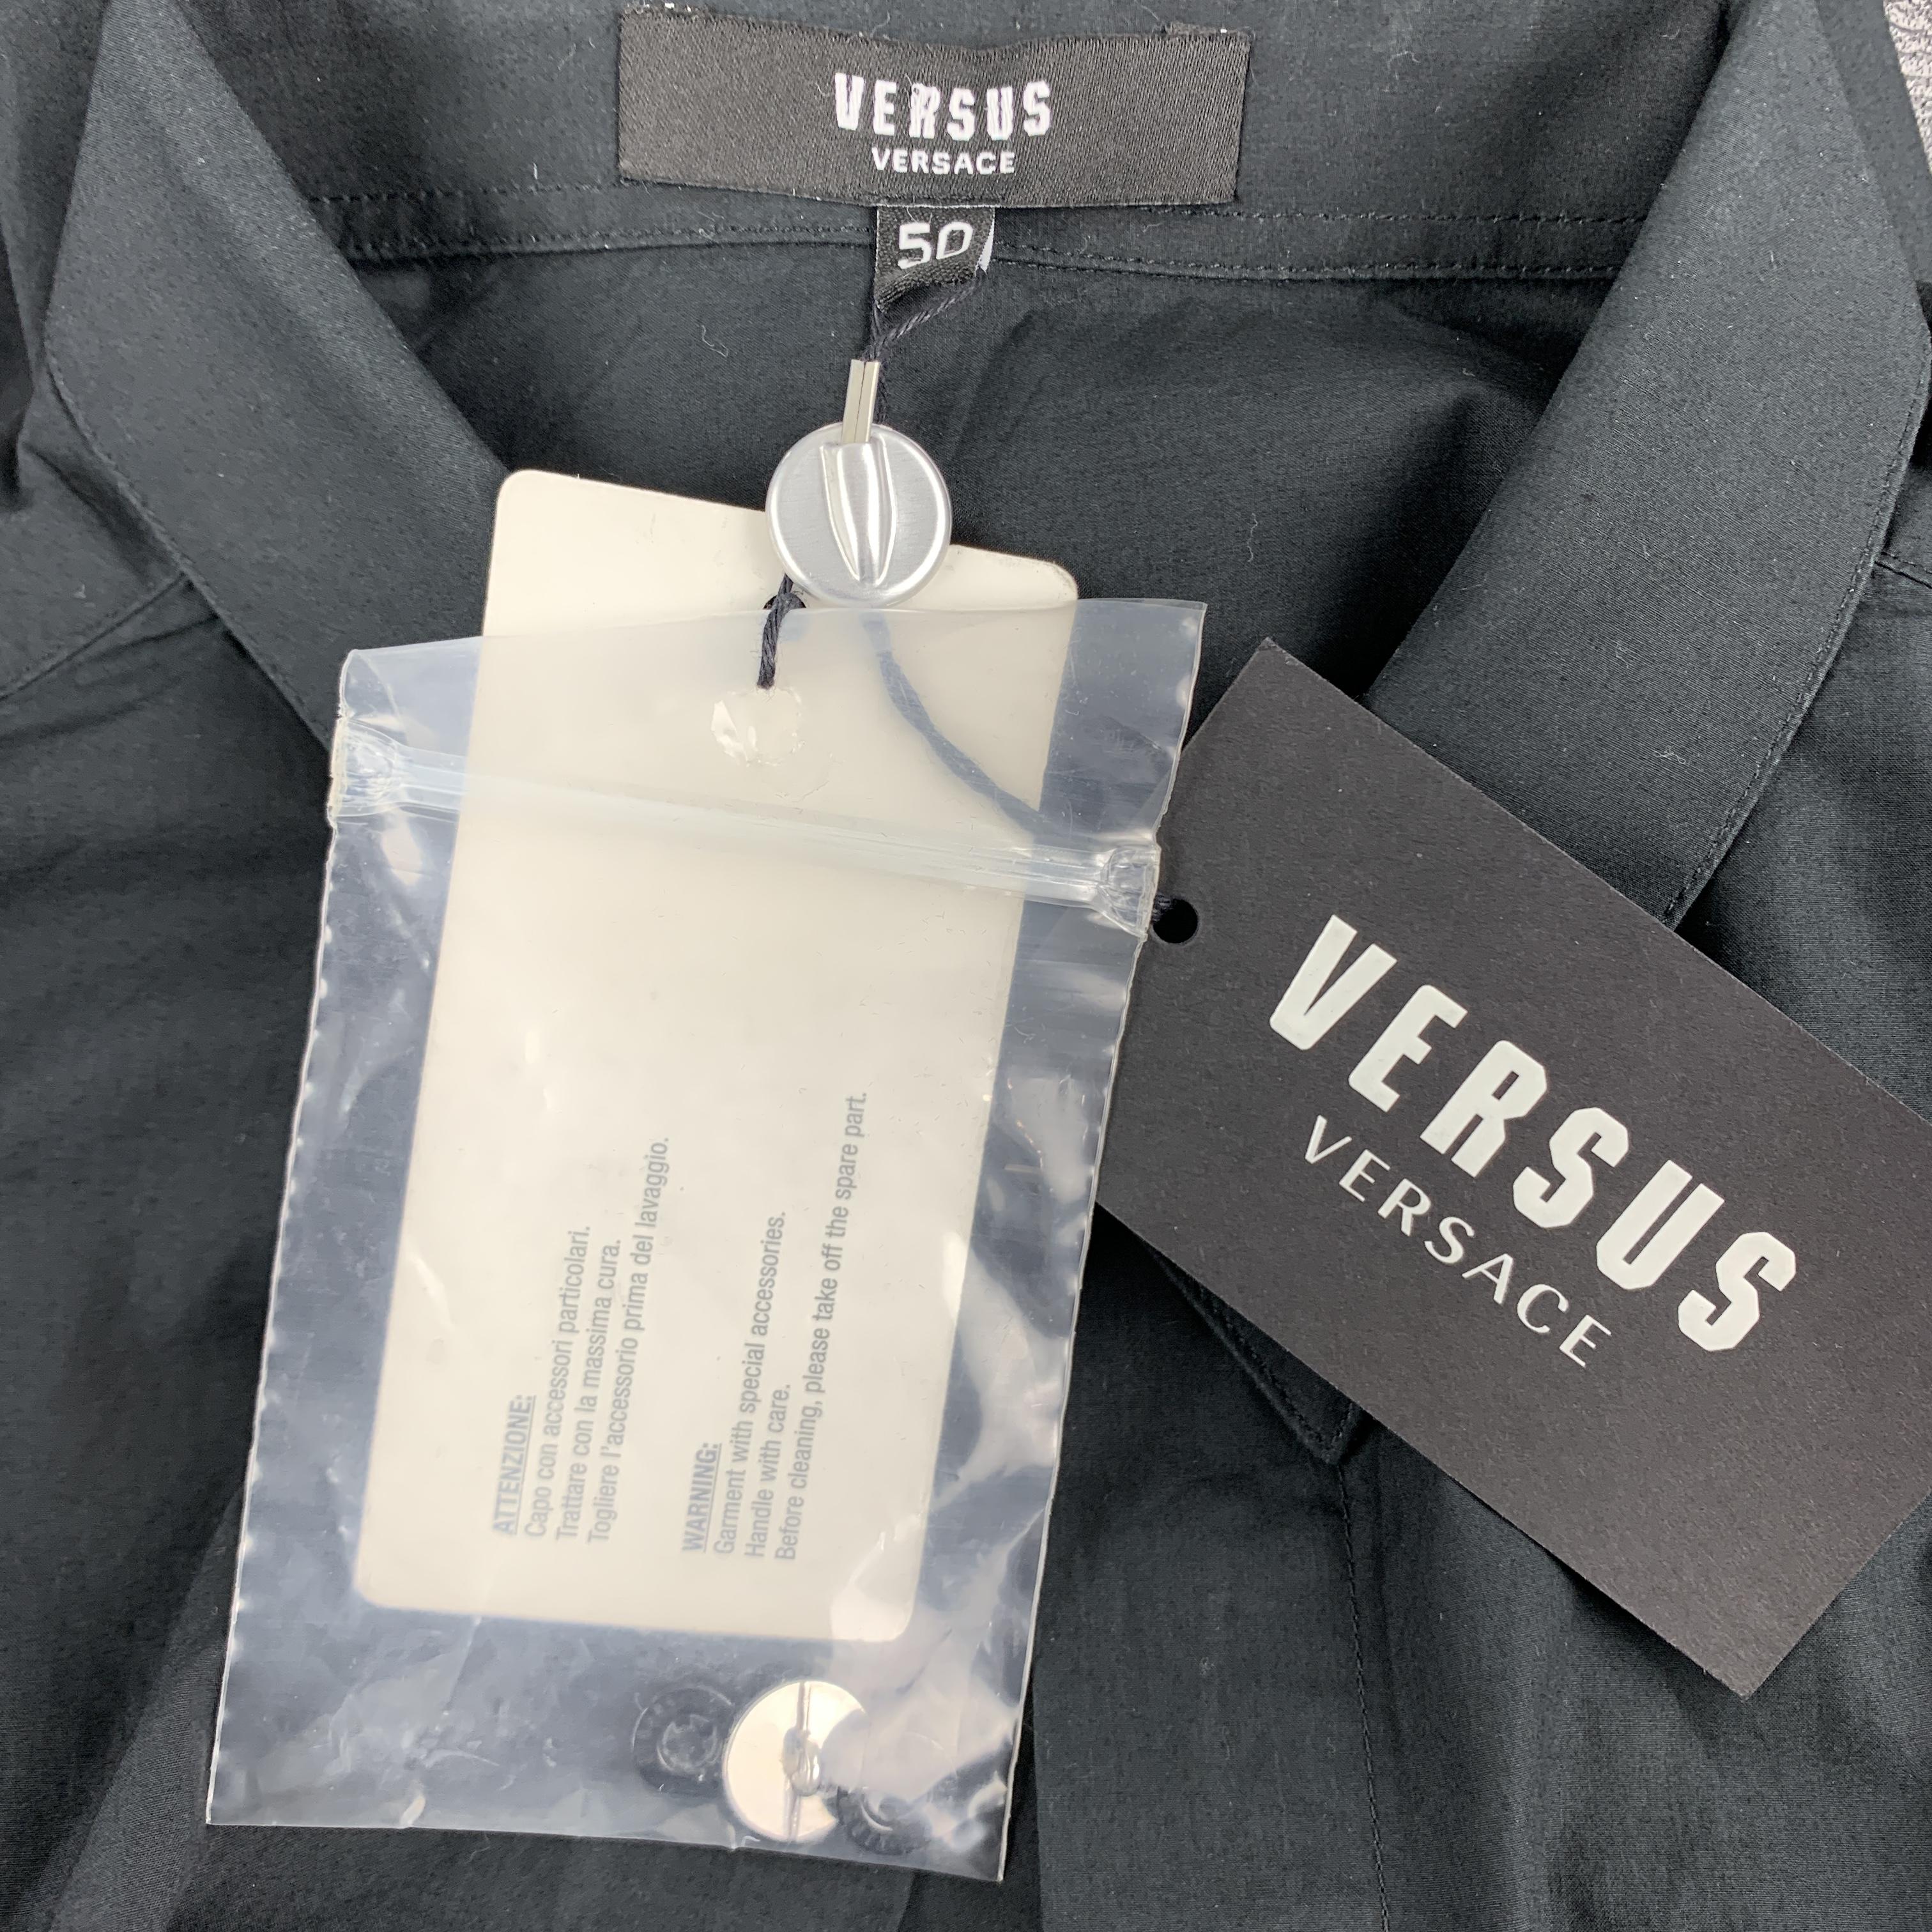 VERSUS by GIANNI VERSACE Size M Black Solid Cotton Long Sleeve Shirt 1